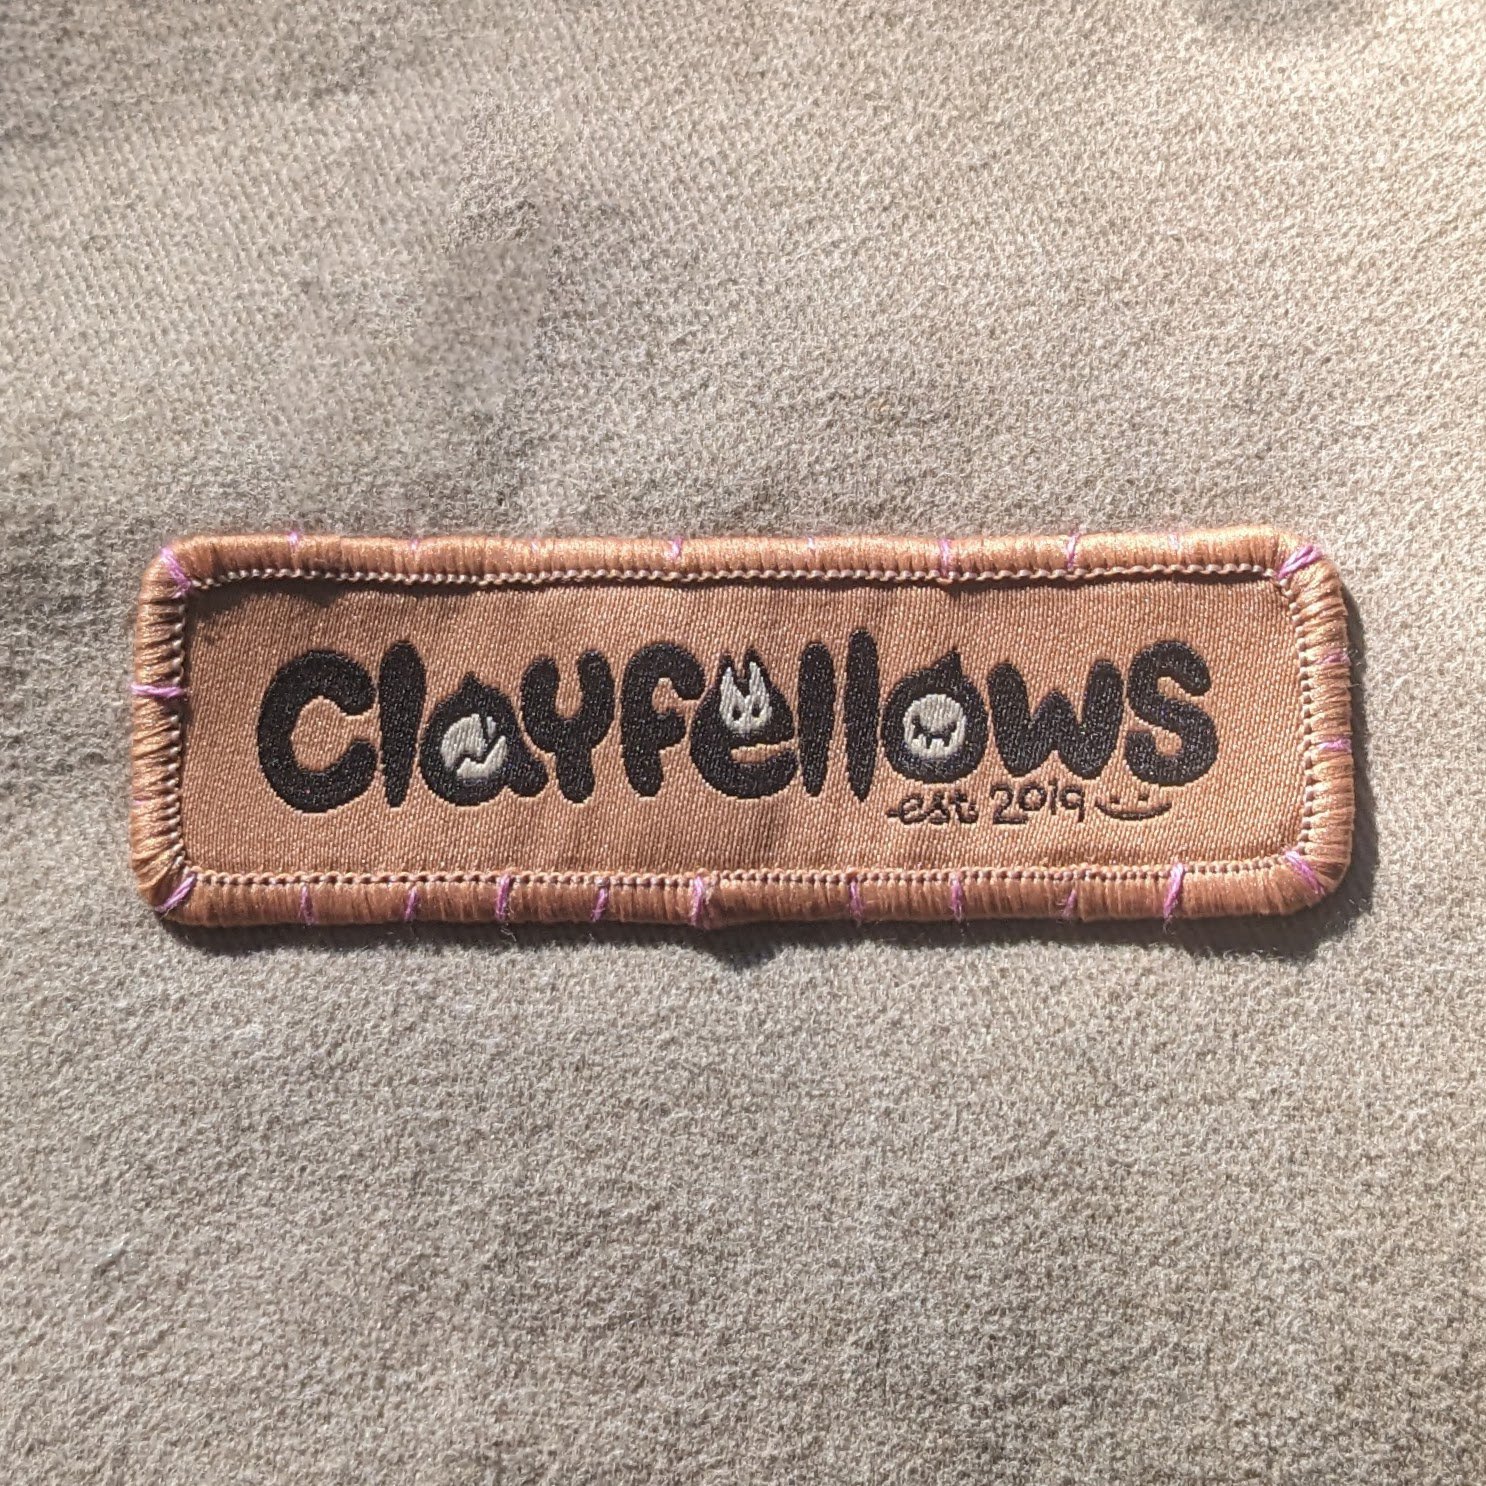 Clayfellows Sew-On Patches